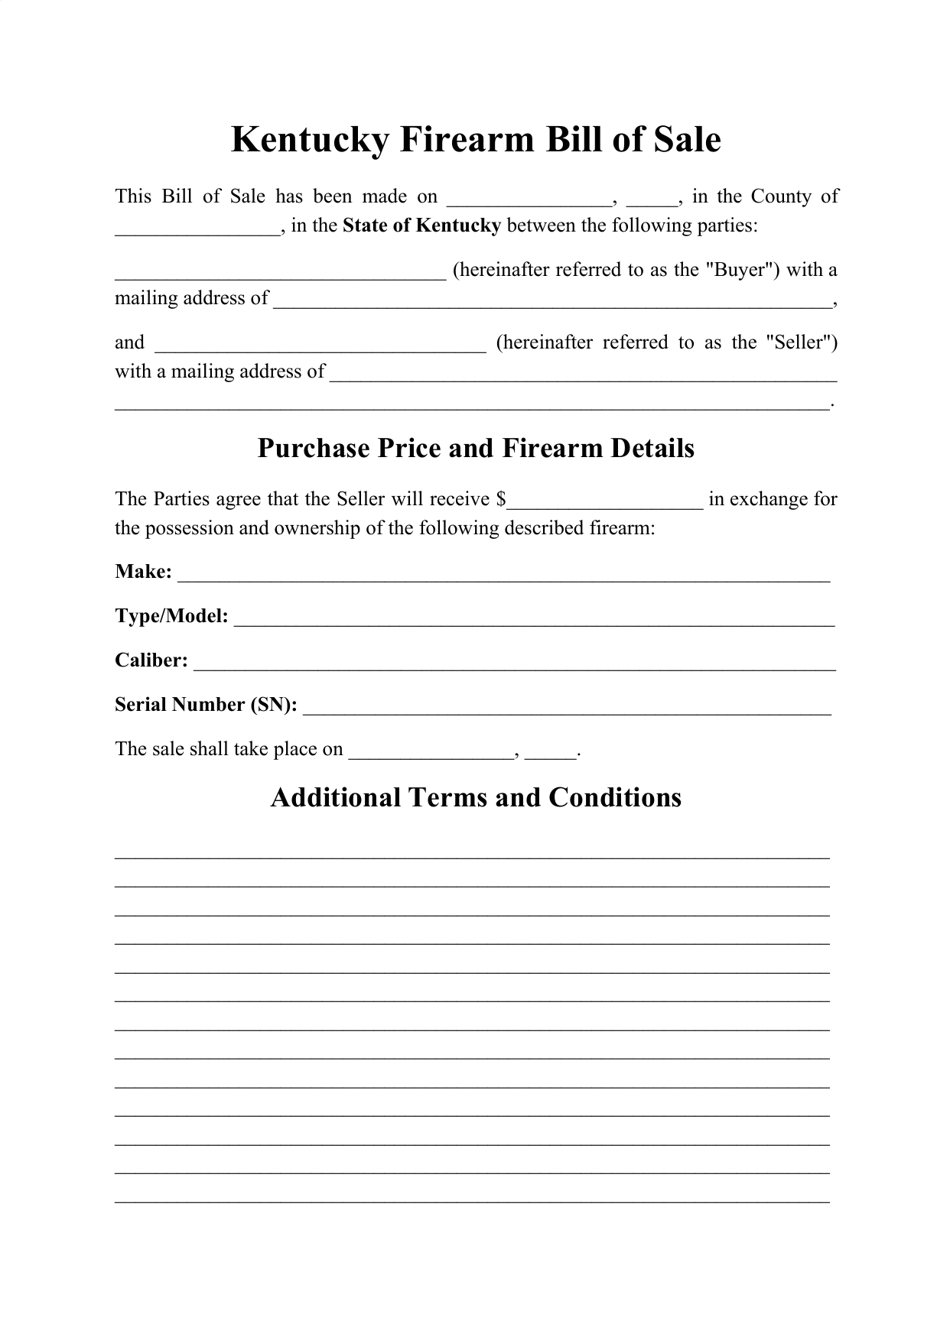 Kentucky Firearm Bill of Sale Form Fill Out, Sign Online and Download